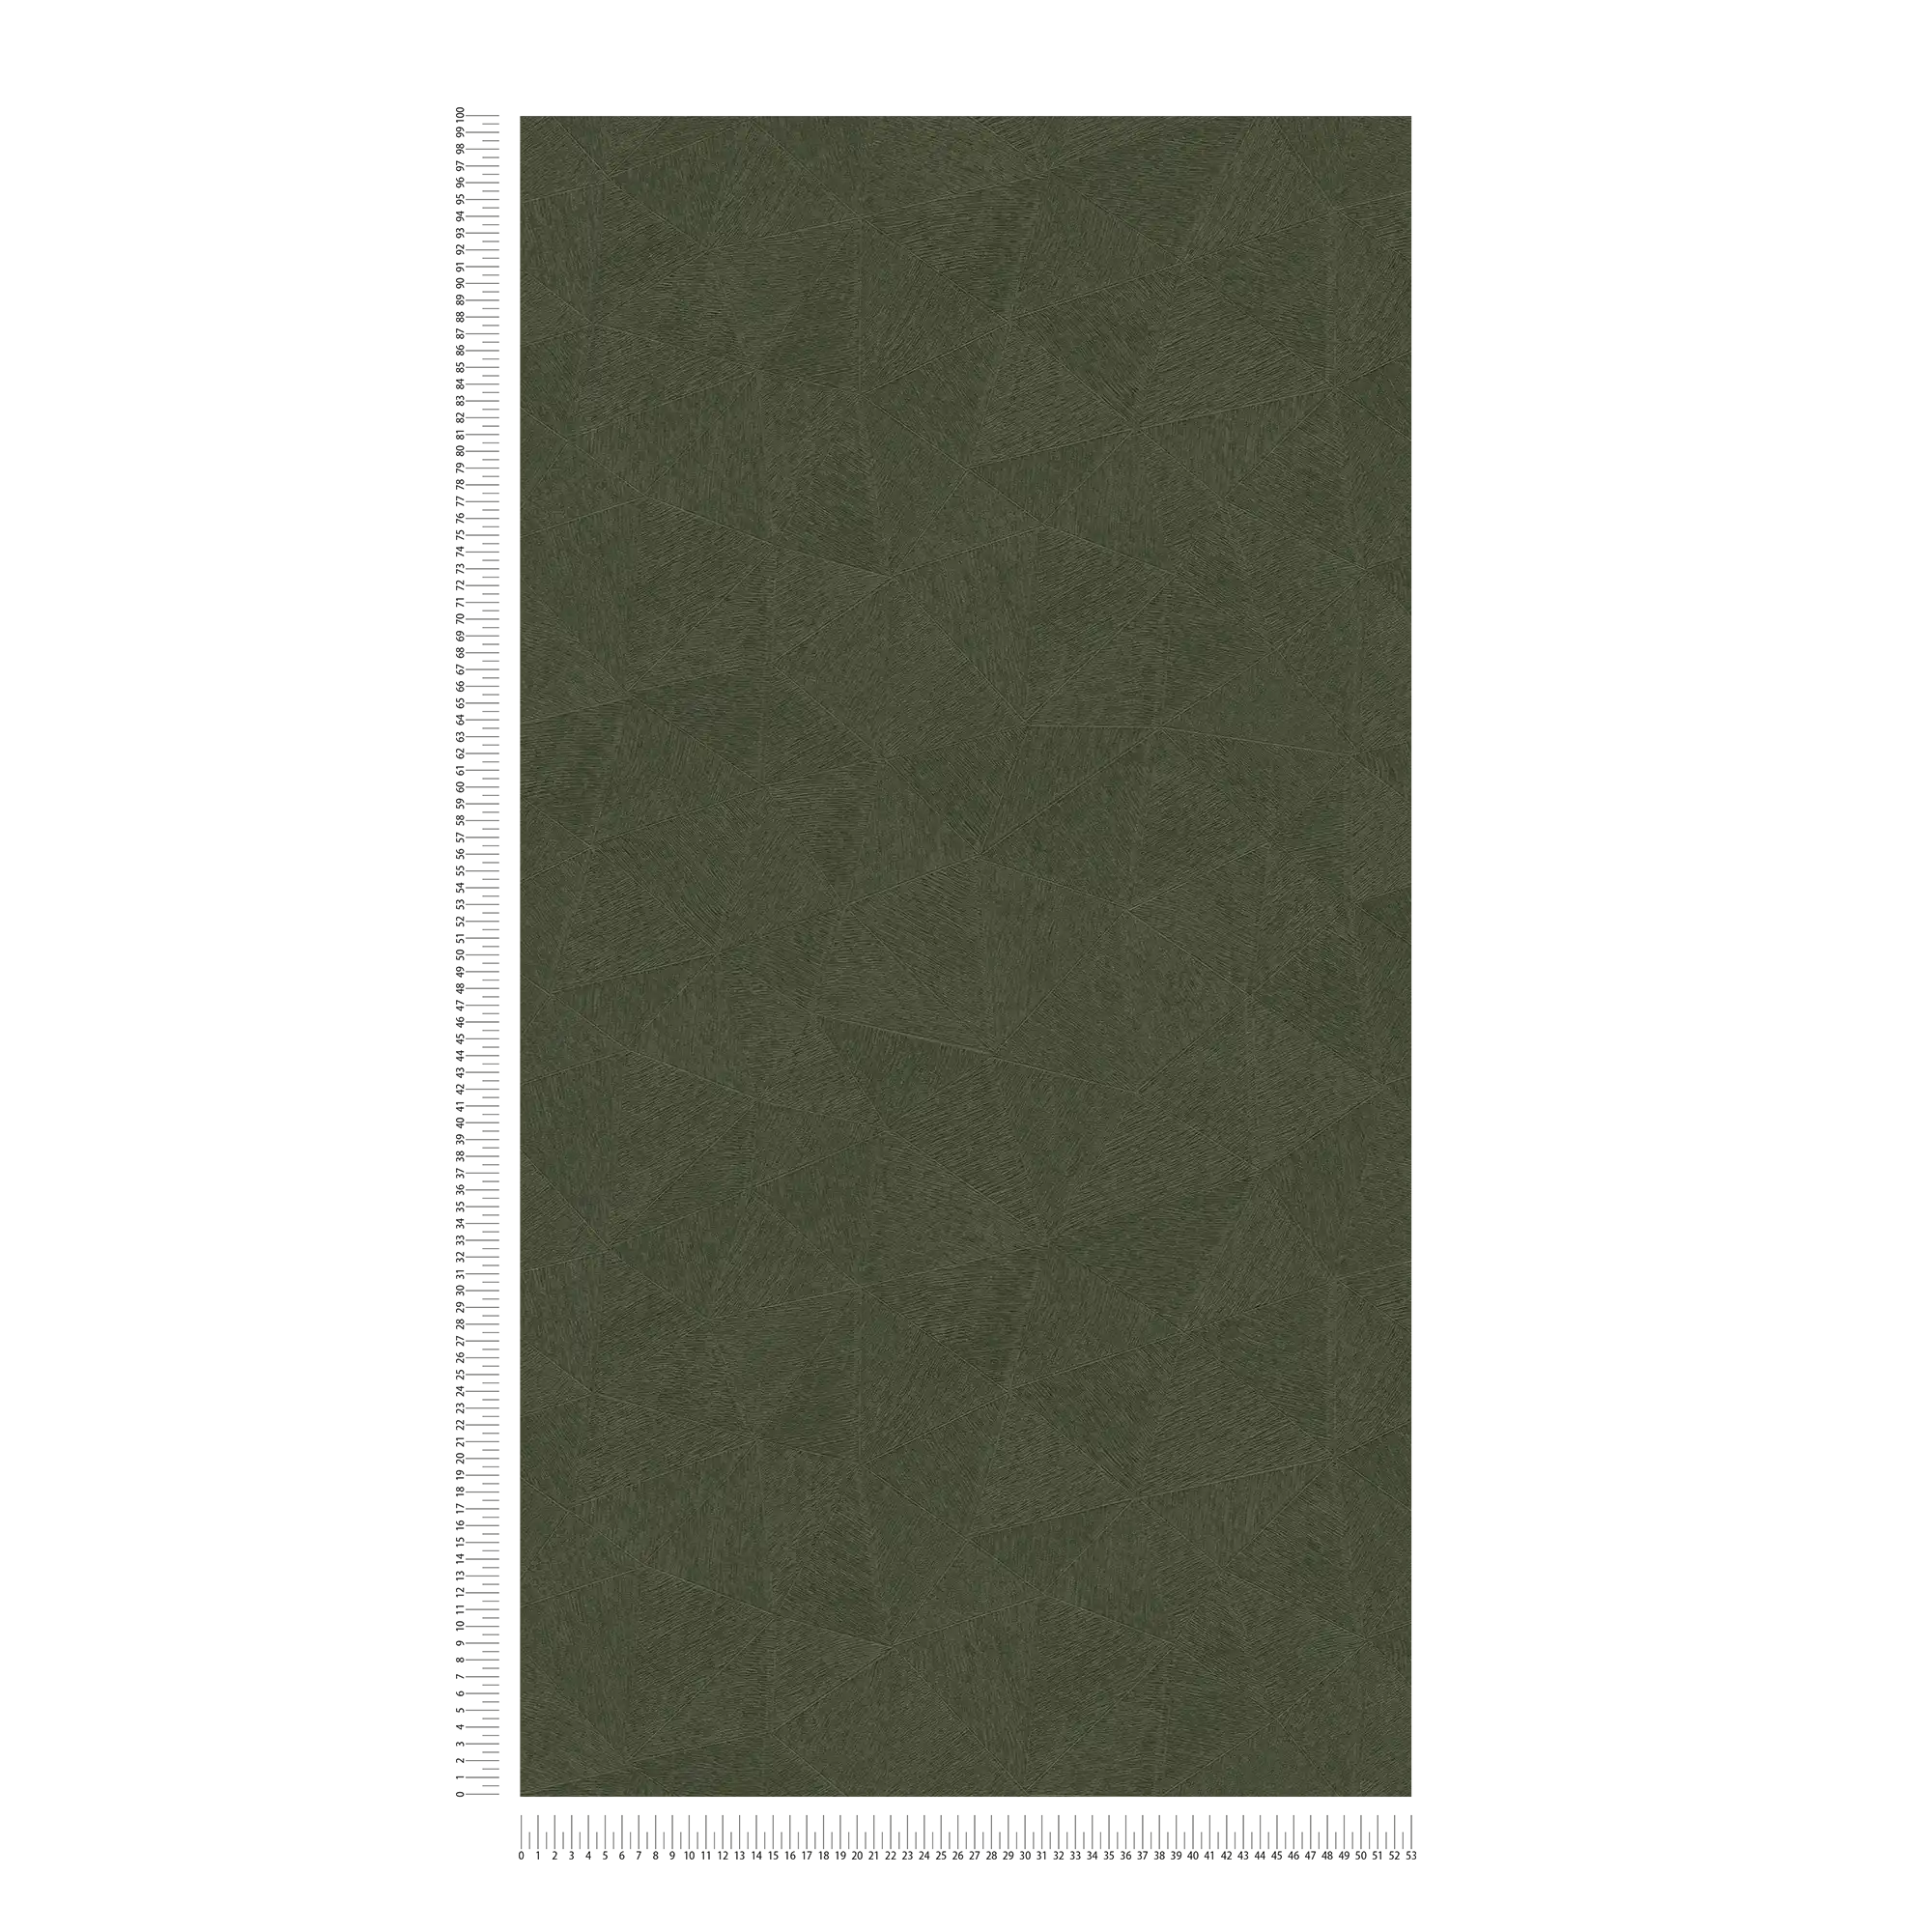             Non-woven wallpaper with subtle graphic pattern - green
        